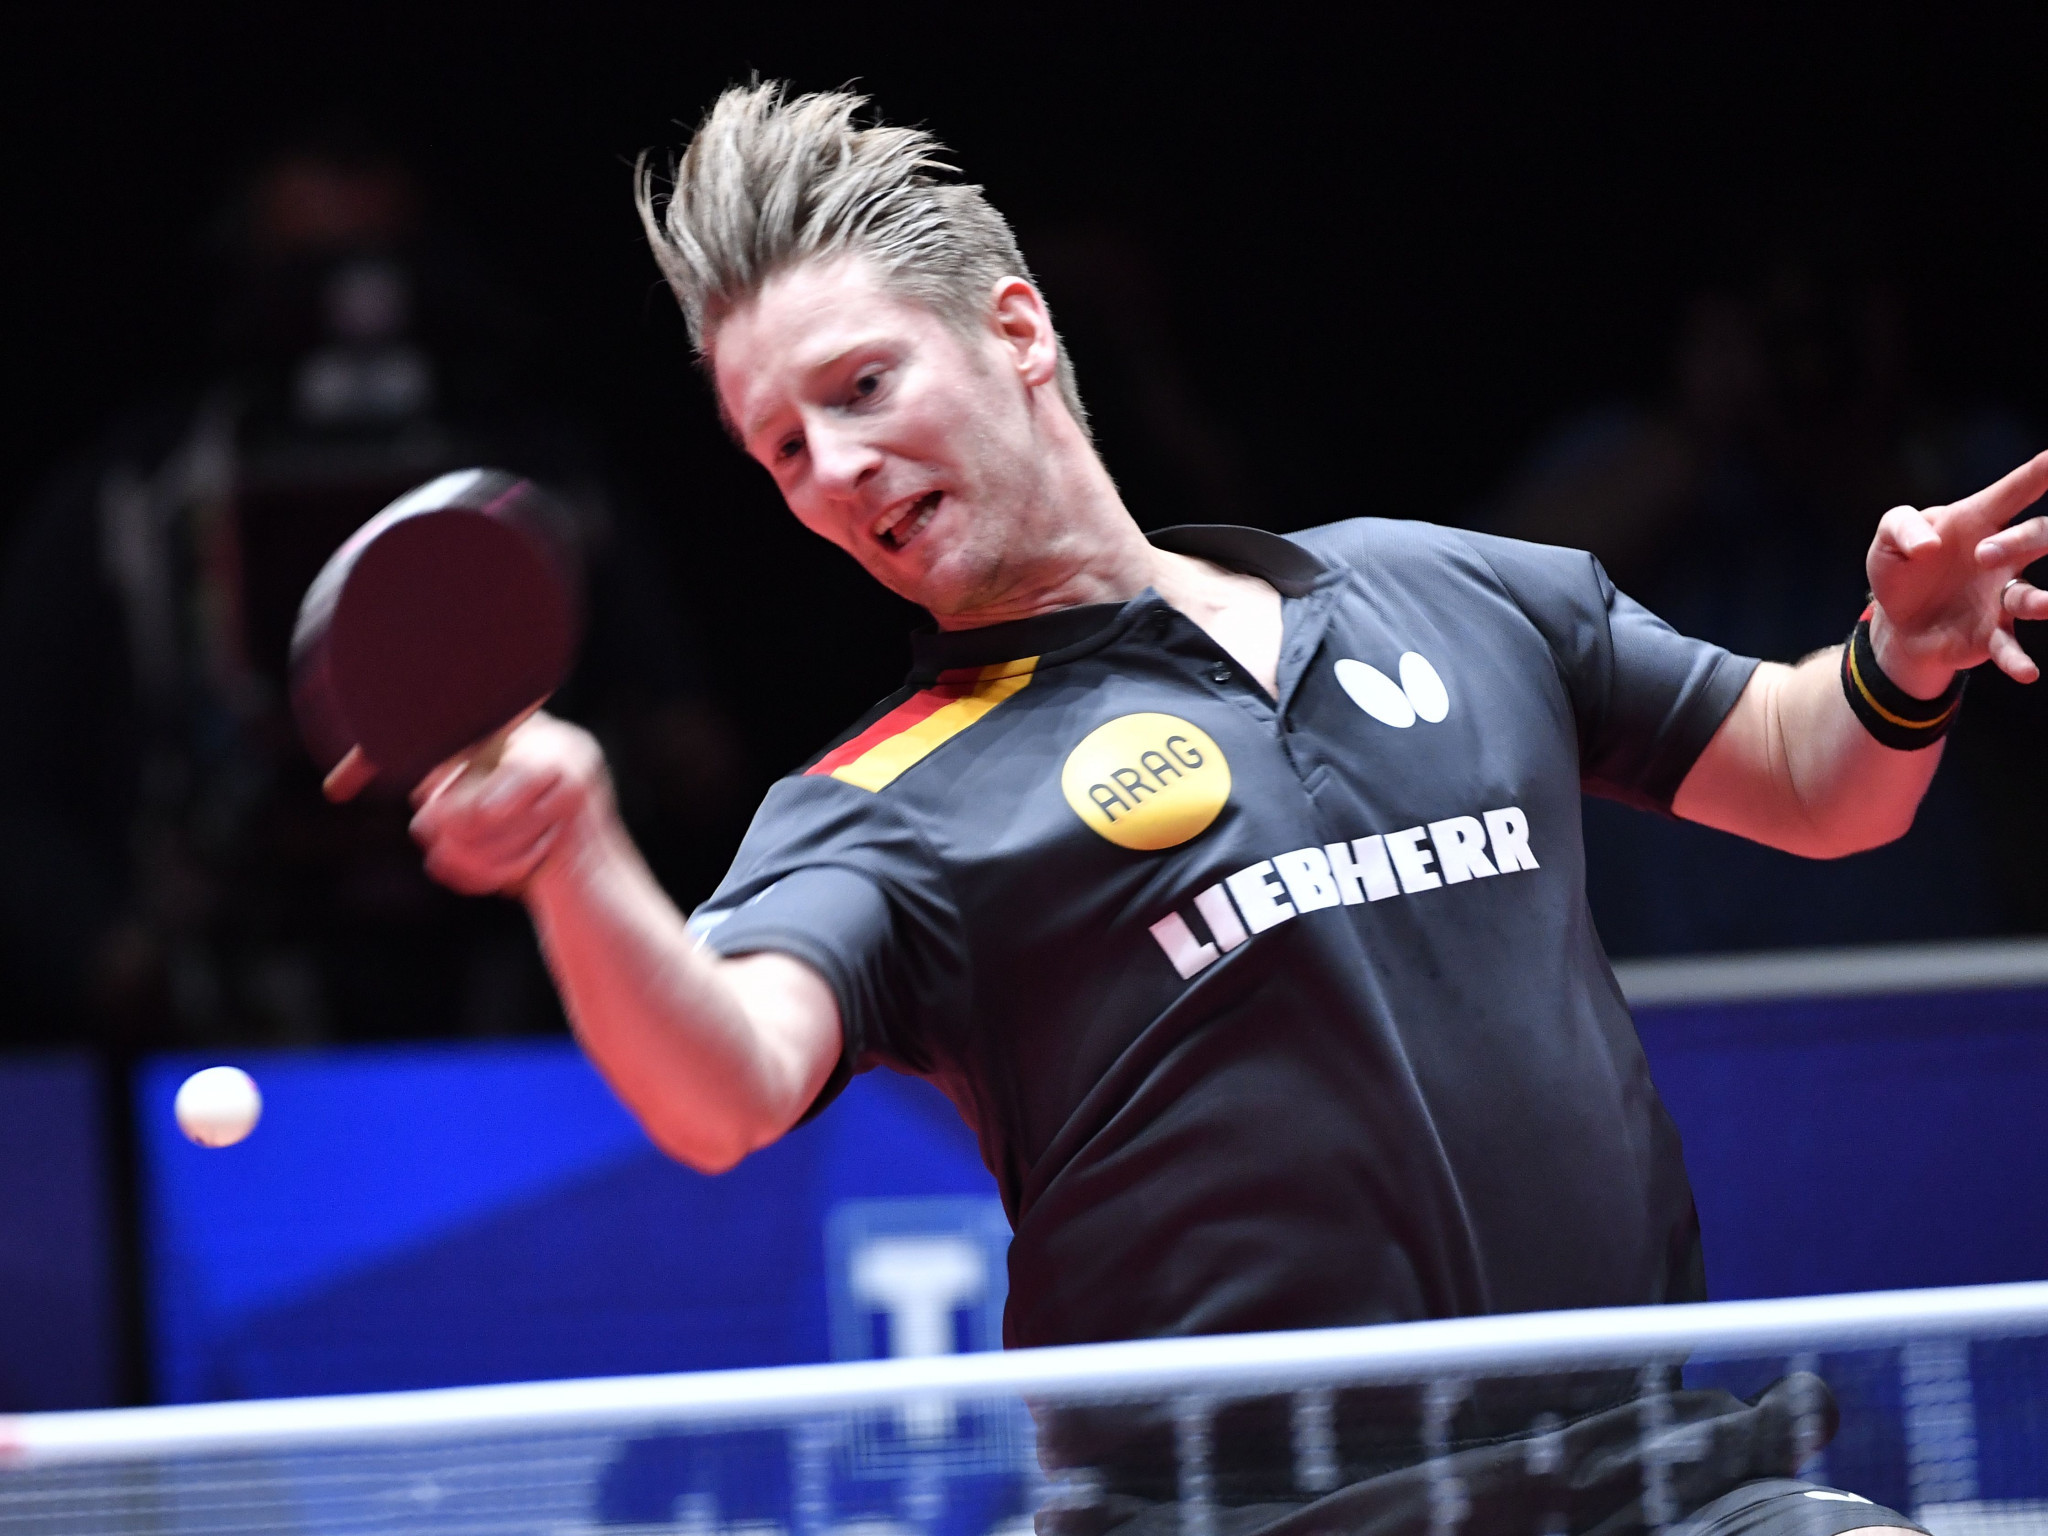 The International Table Tennis Federation has announced "unprecedented" interest in hosting its World Championships Finals in 2021 and 2022 ©Getty Images